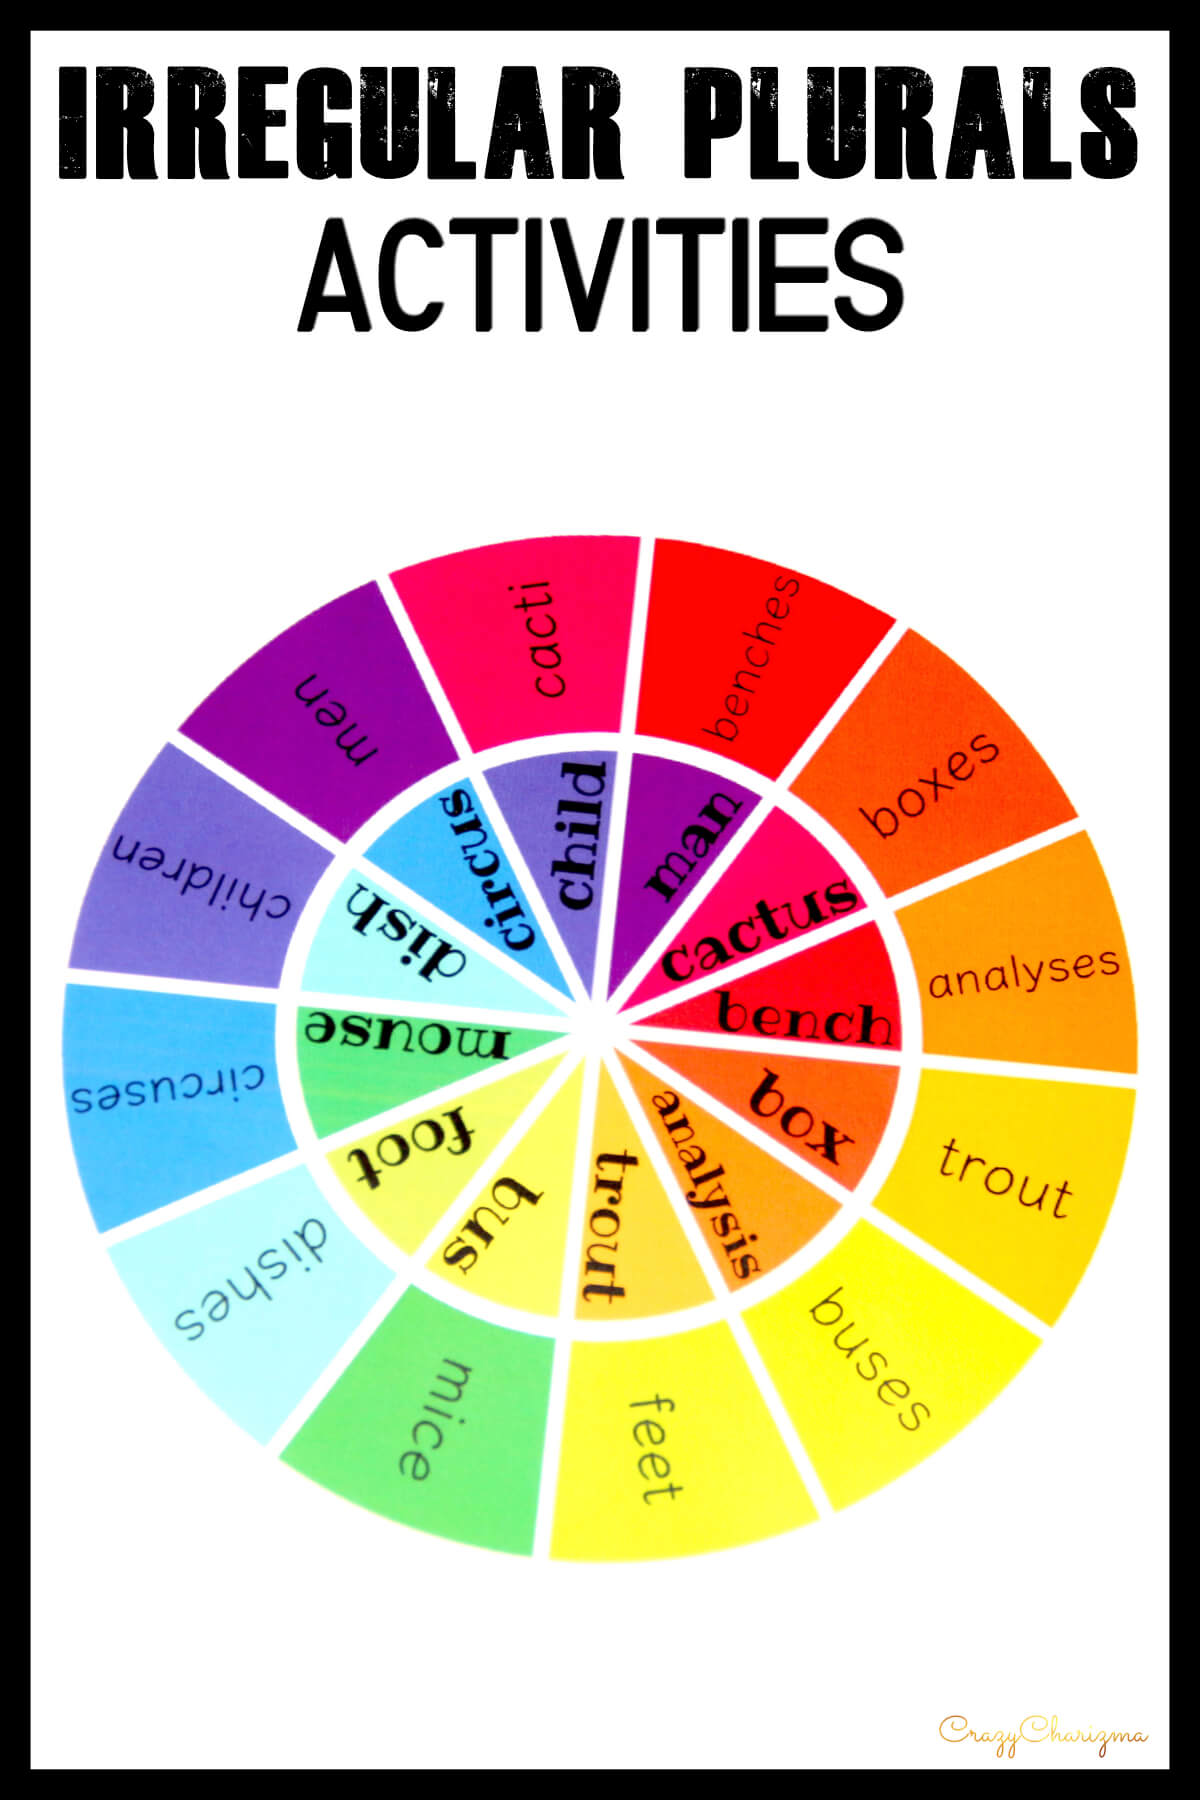 These Wheels activities will help you teach and practice 108 irregular plural nouns in an engaging way. Great for Test Prep, ELA centers, Early Finishers, Assessment, Extra Practice, Review & More.